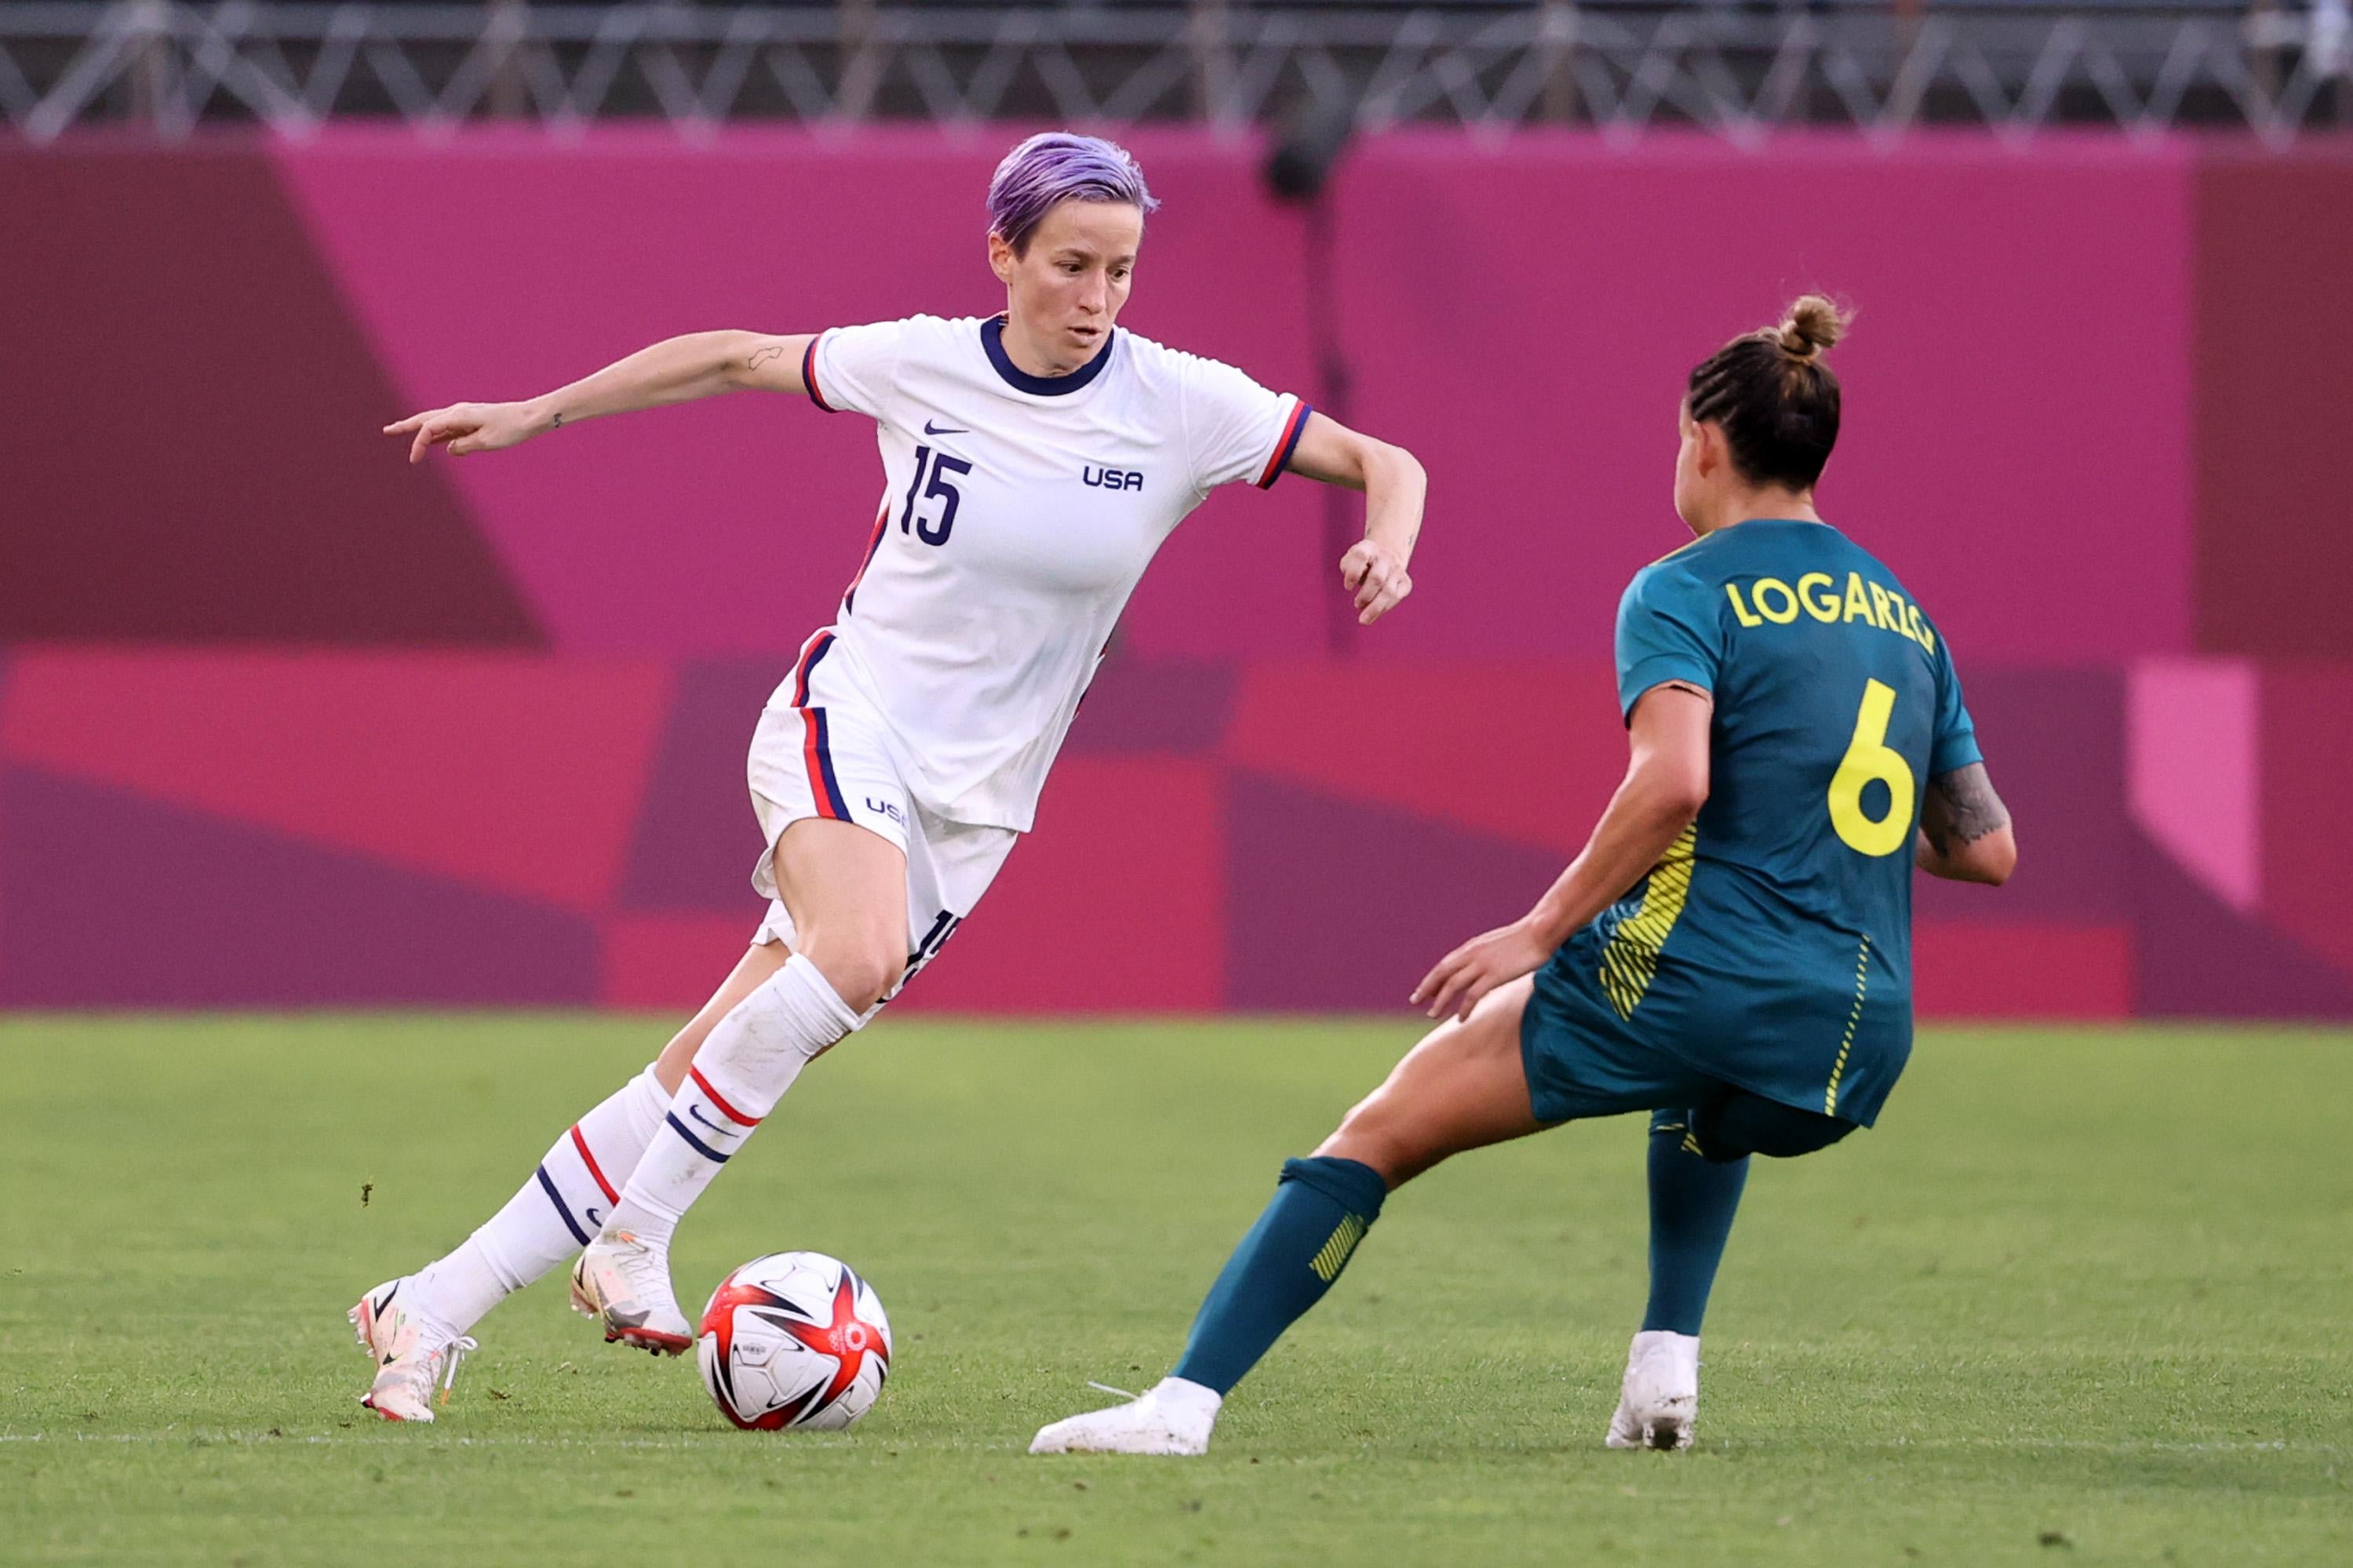 Rapinoe lunging while dribbling the ball, with Logarzo defending tightly.